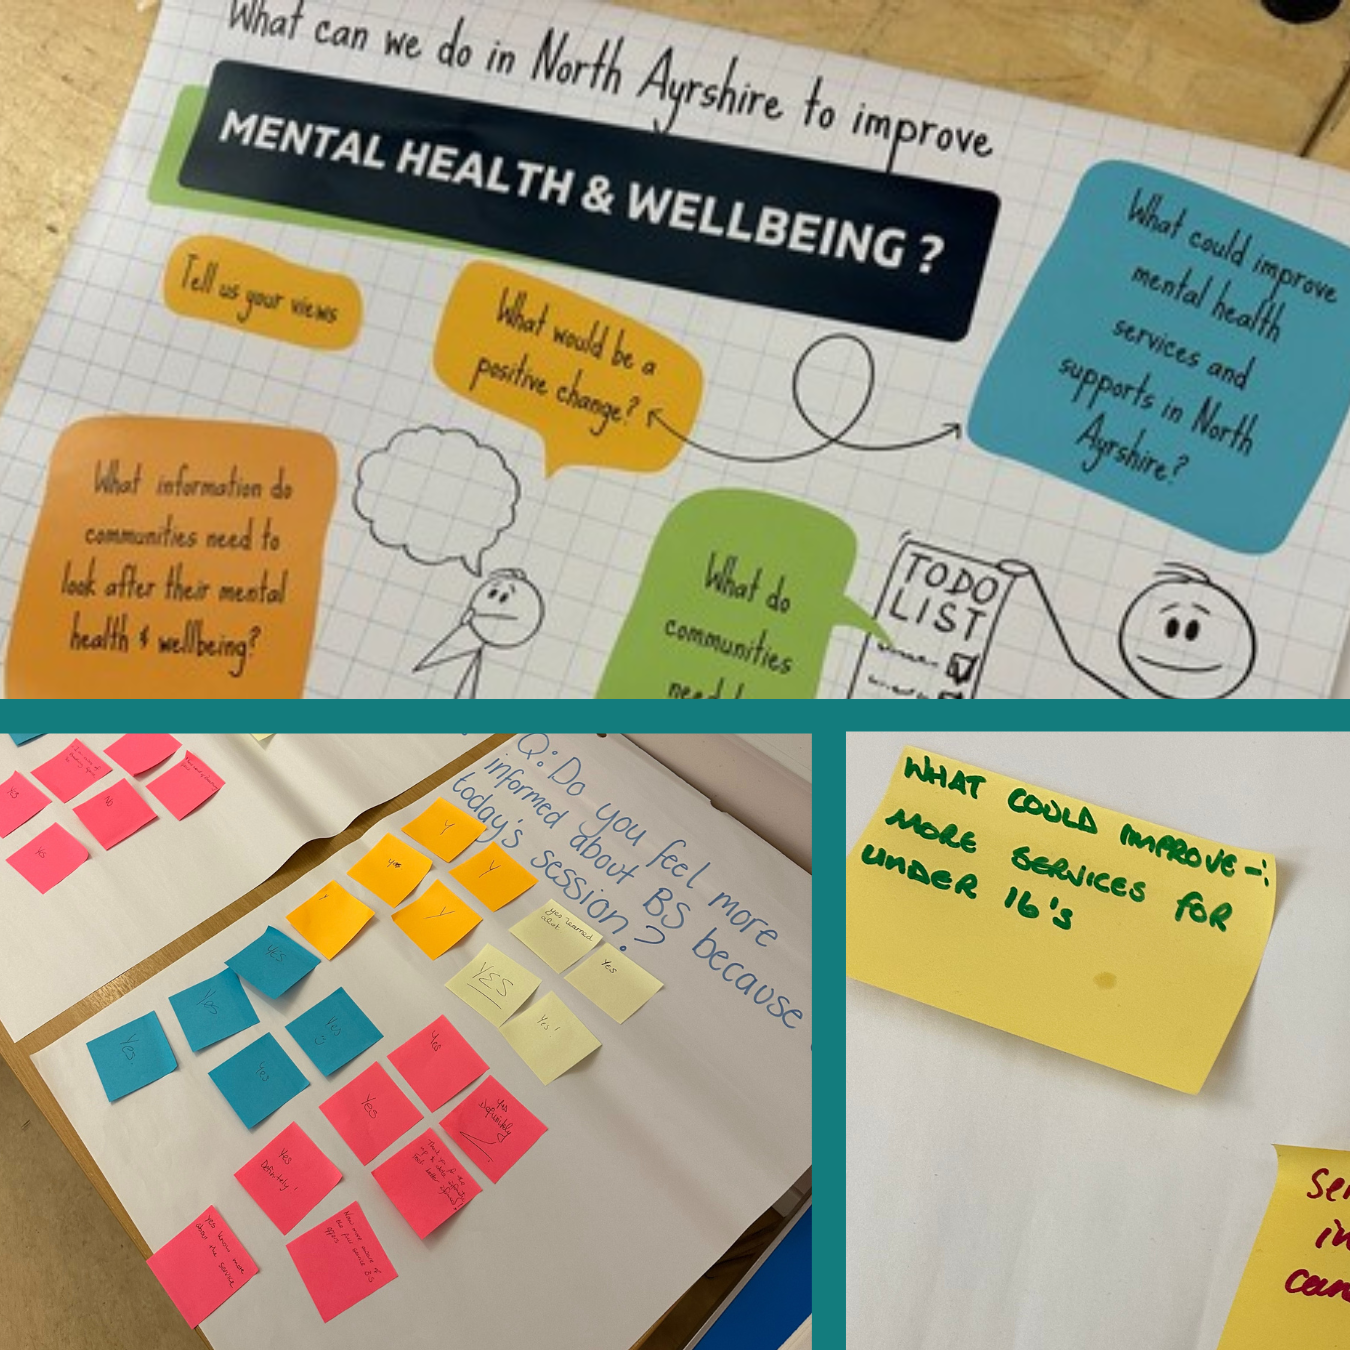 Feedback shared from recent community mental health and wellbeing event on post it notes